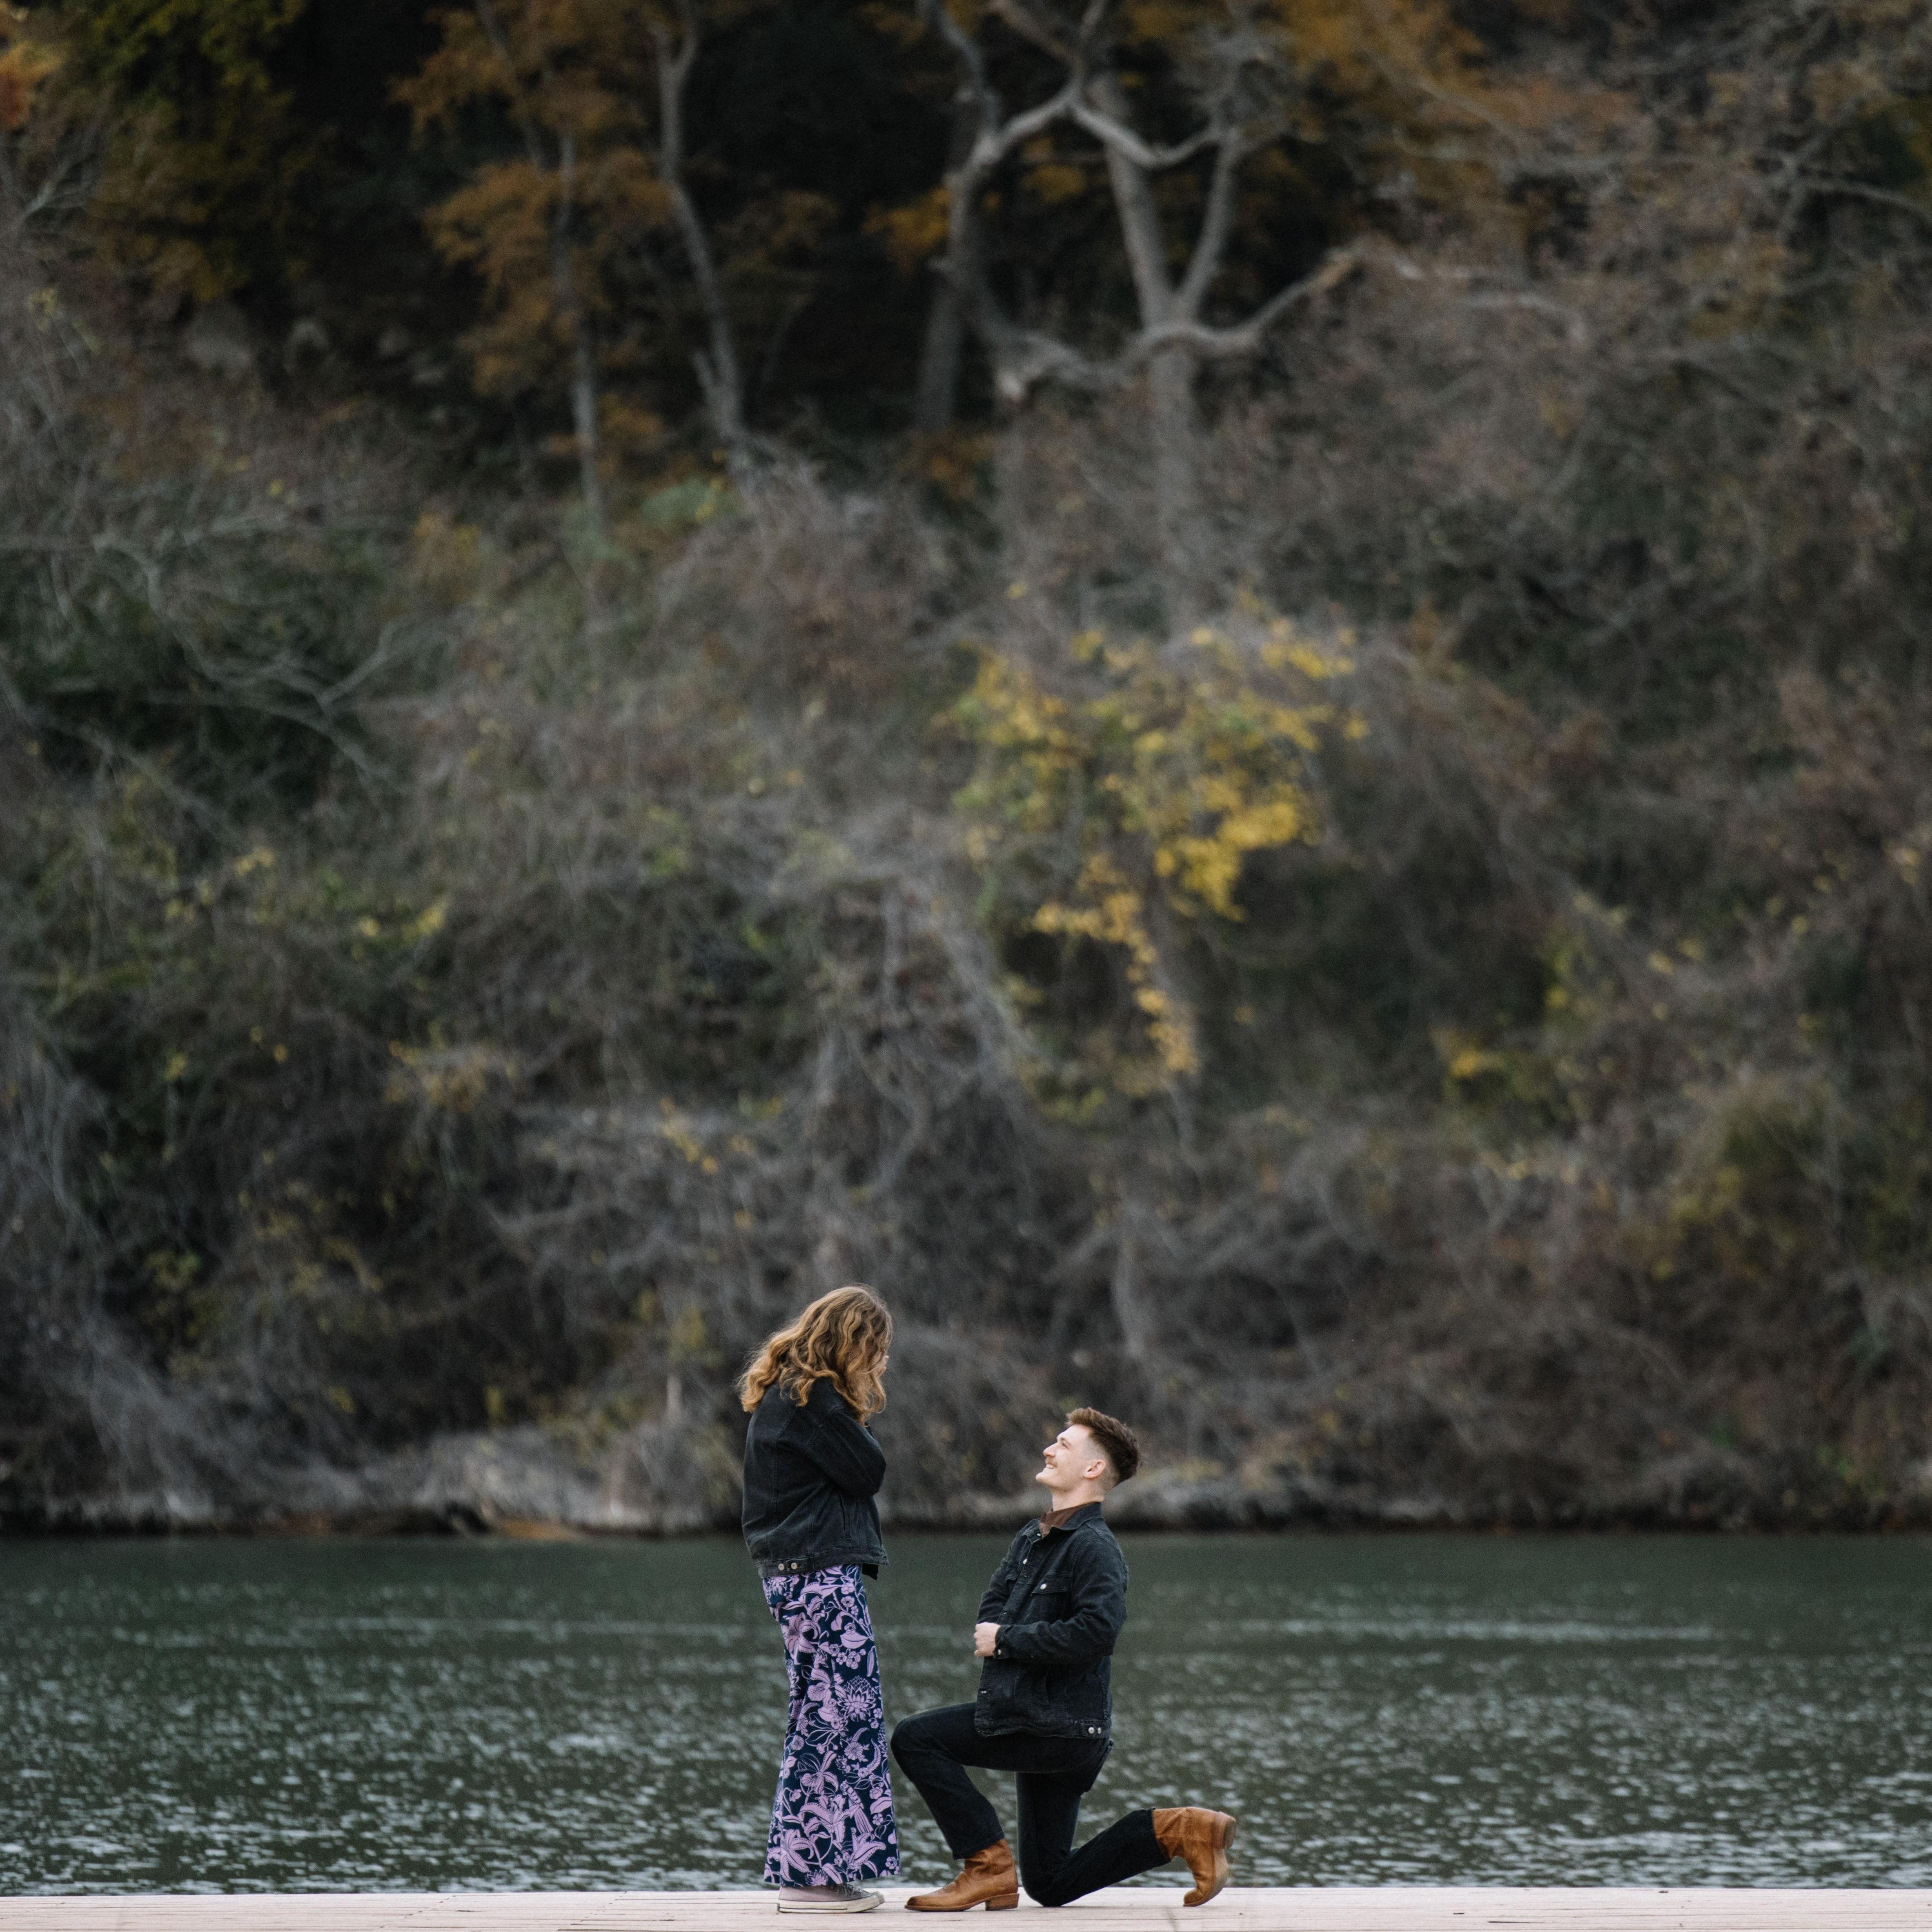 Ben proposed at Commons Ford Park along the Colorado River in Austin, TX.  He and Macy spent the day at an art gallery, then headed to their favorite spot, Sway, for dinner.